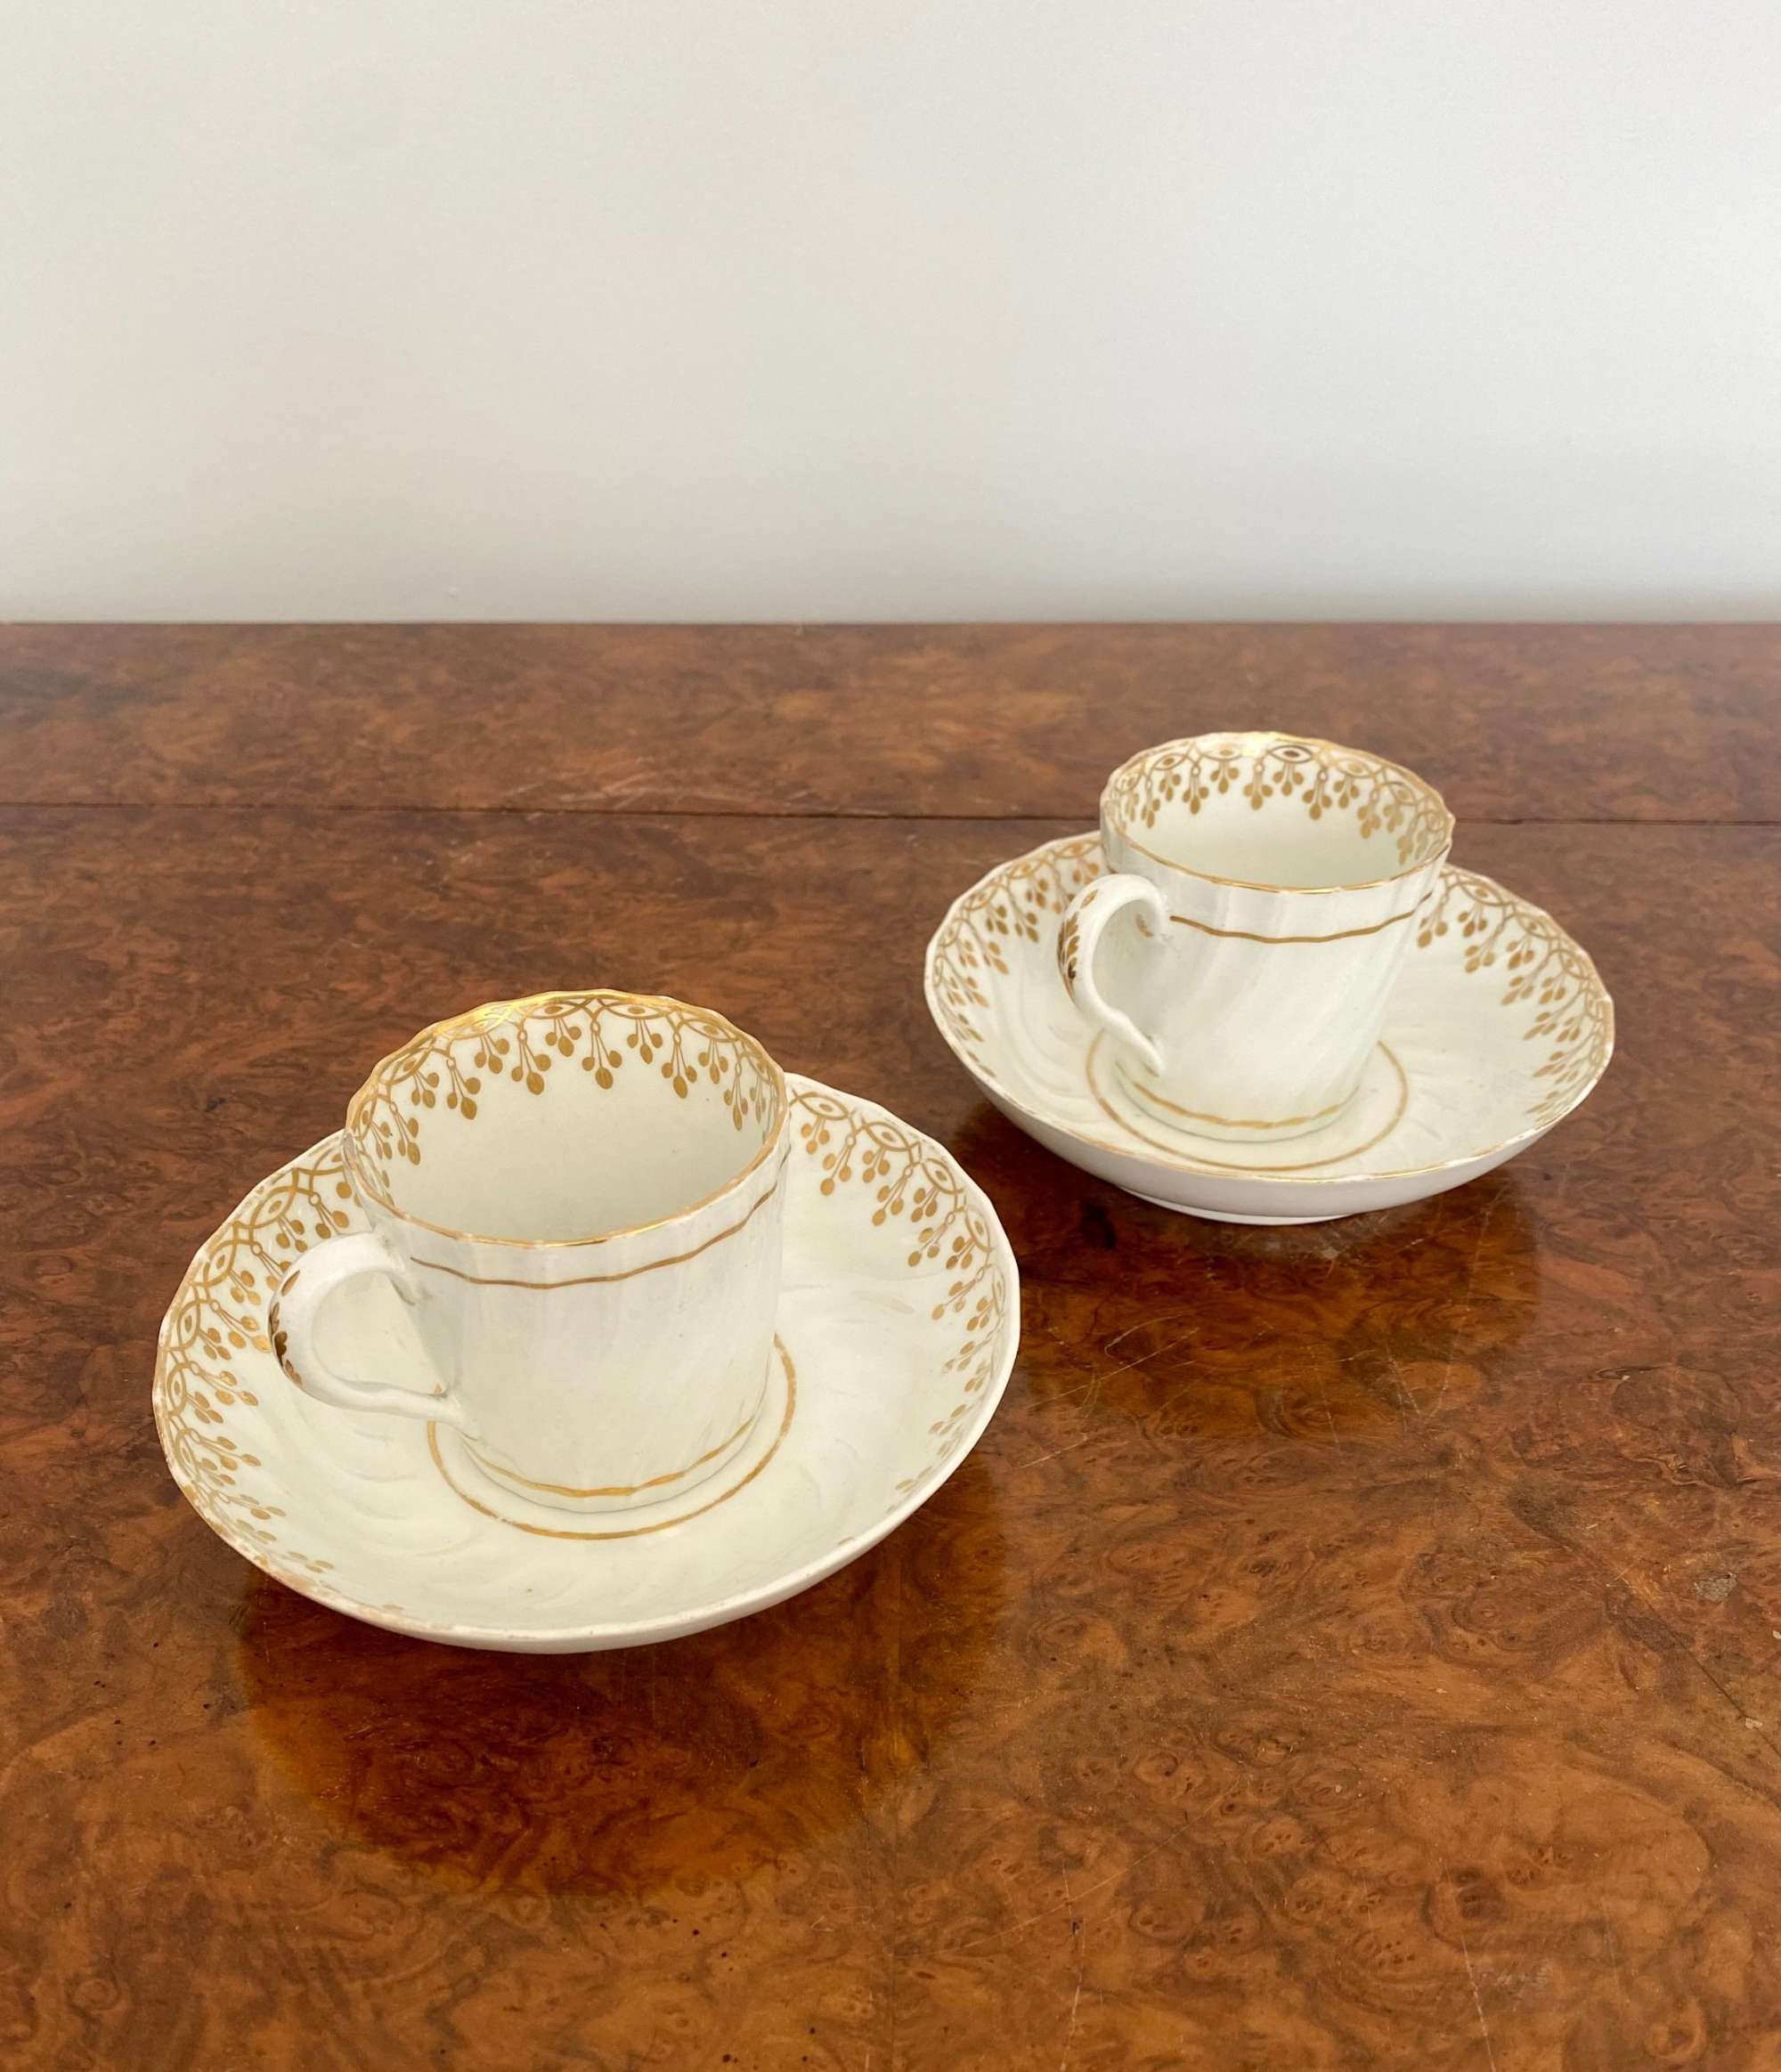 Quality Pair Of 19th Century Teacups & Saucers